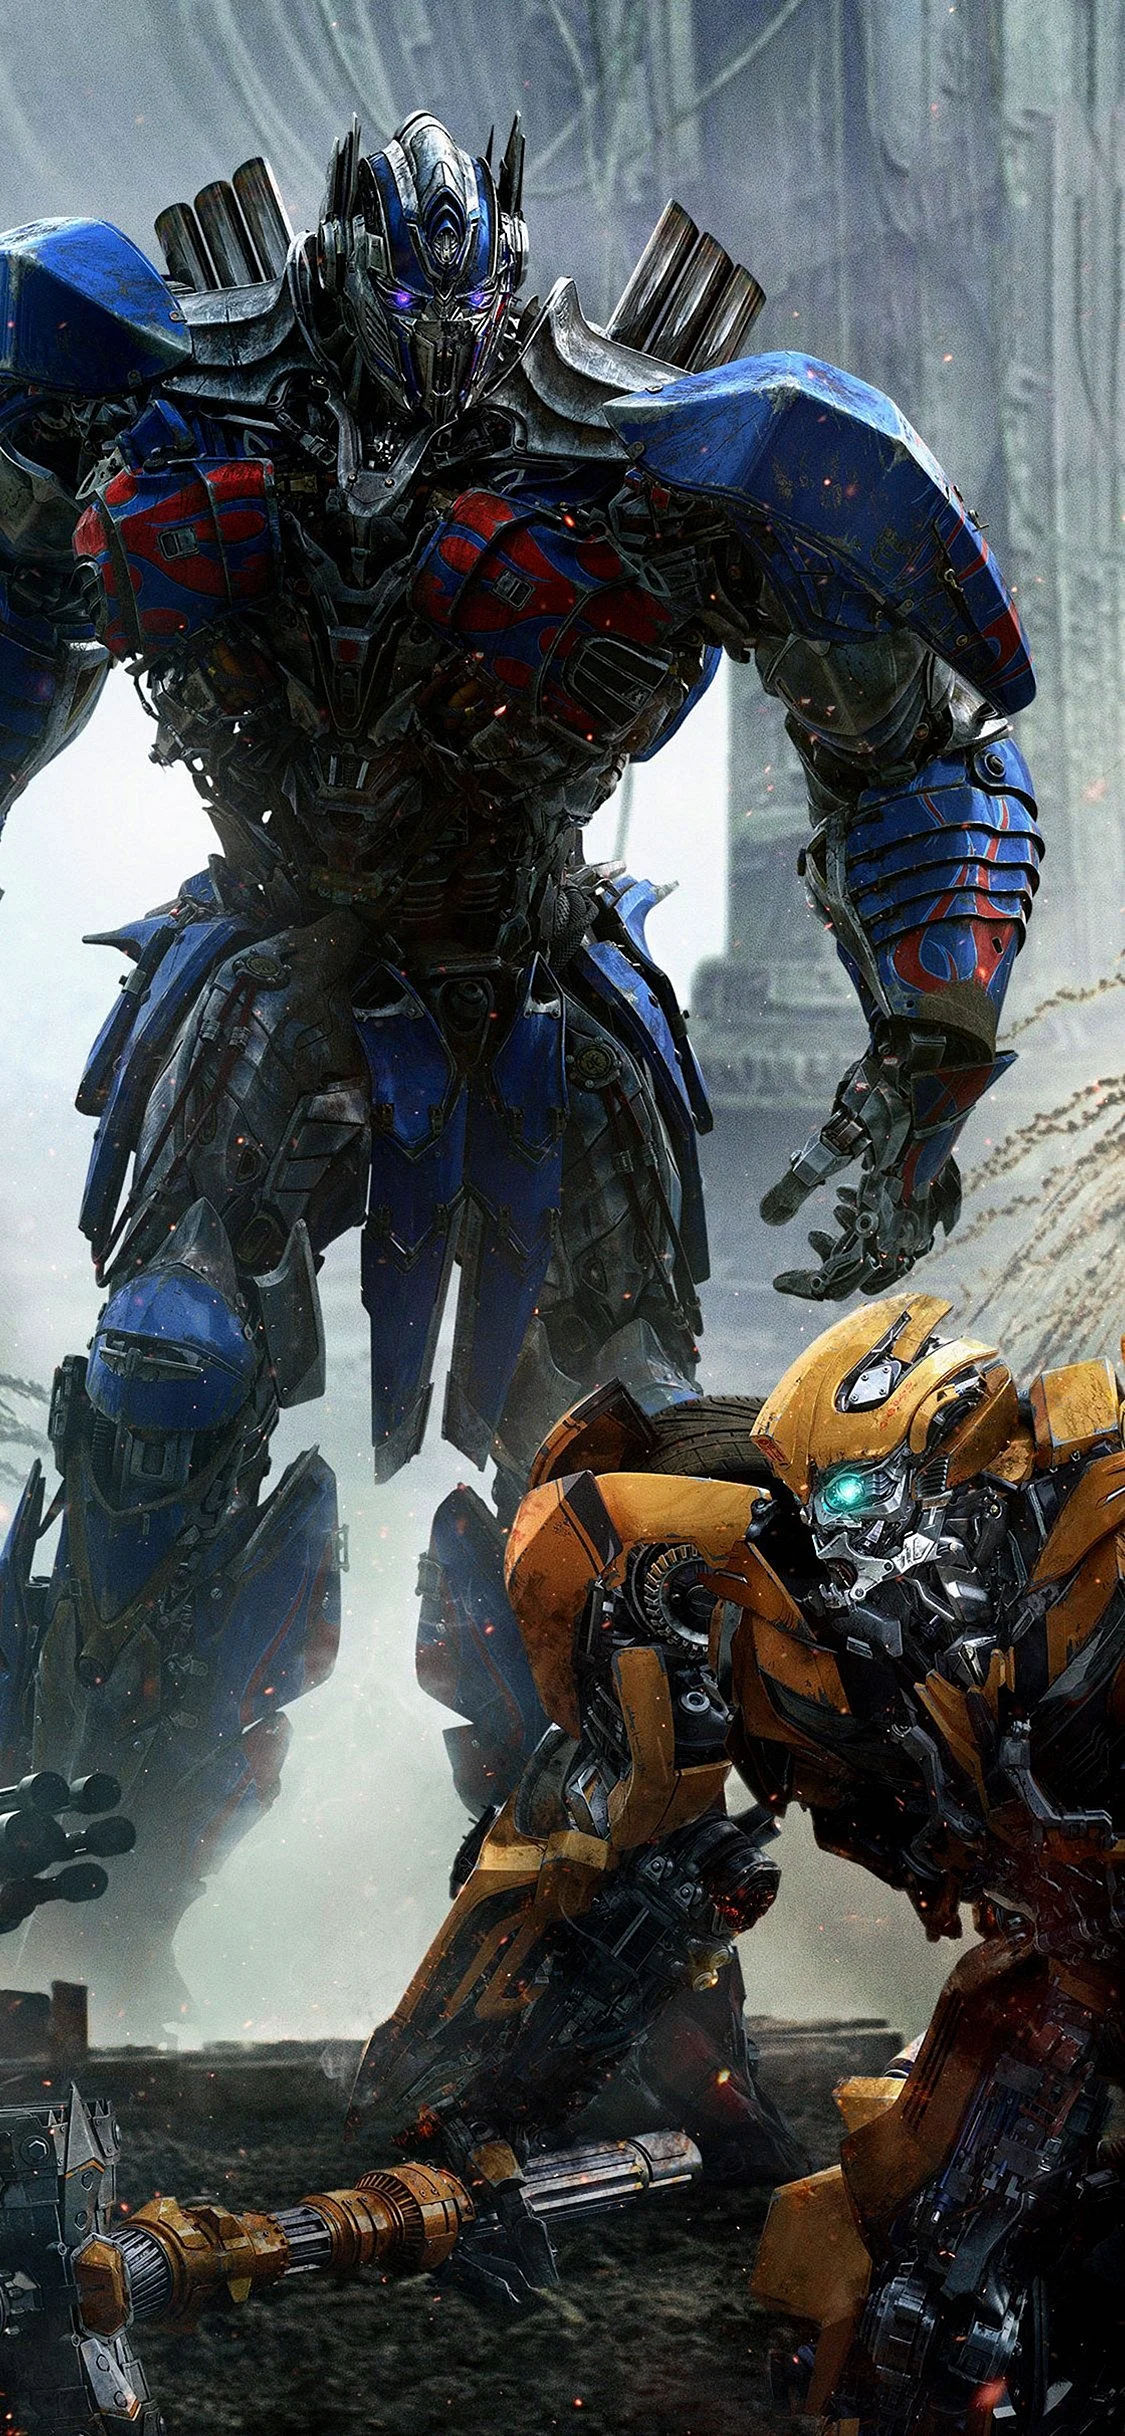 Transformers 5 Wallpaper For iPhone